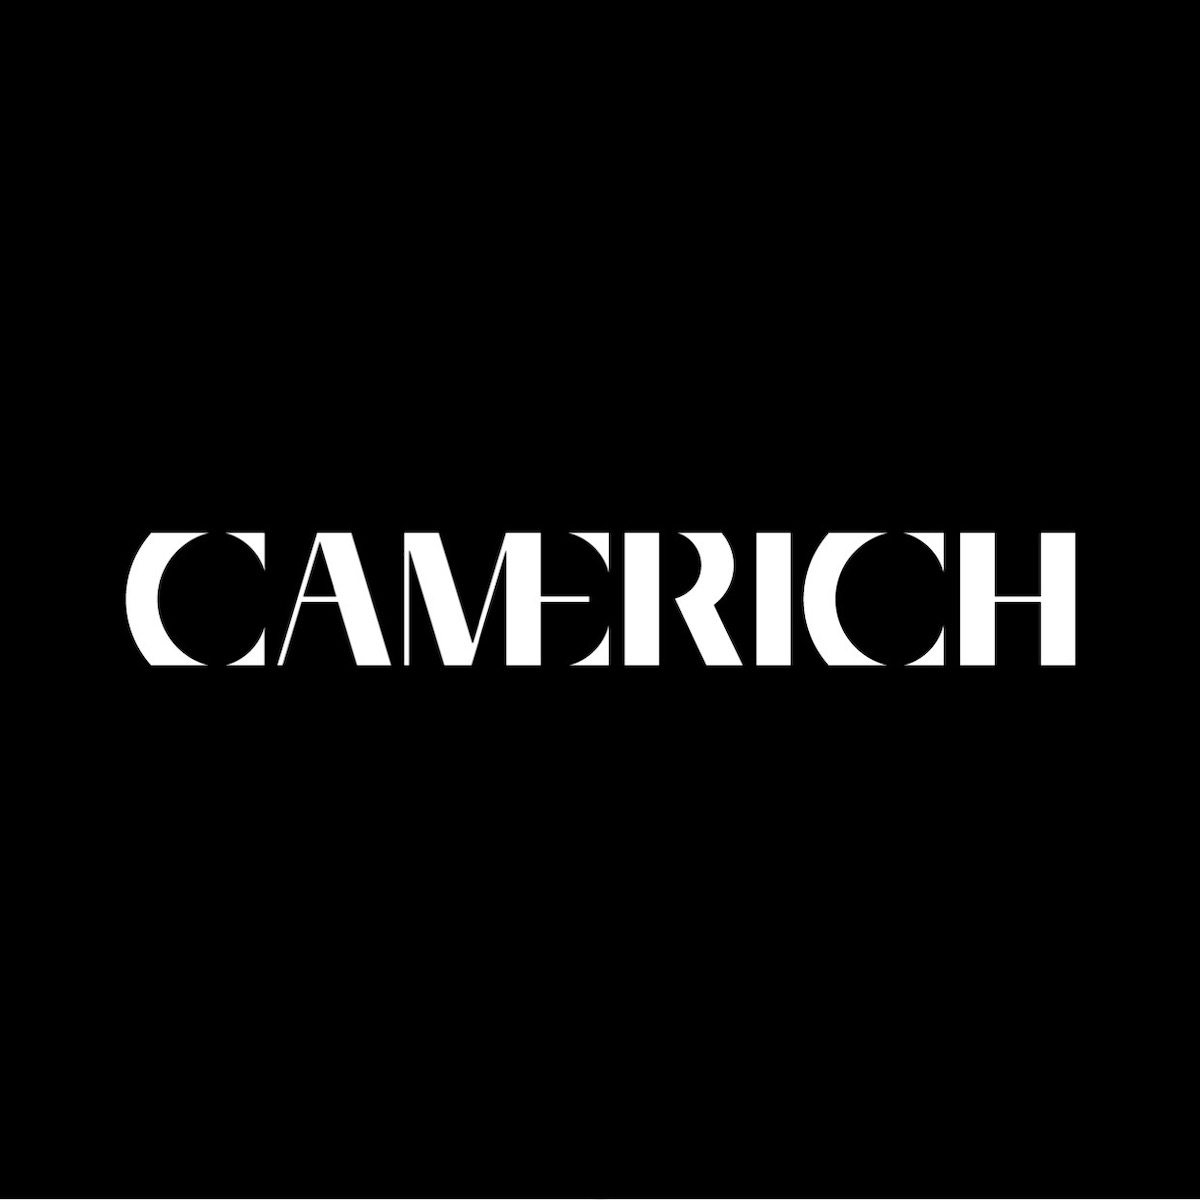 Camerich Daybeds